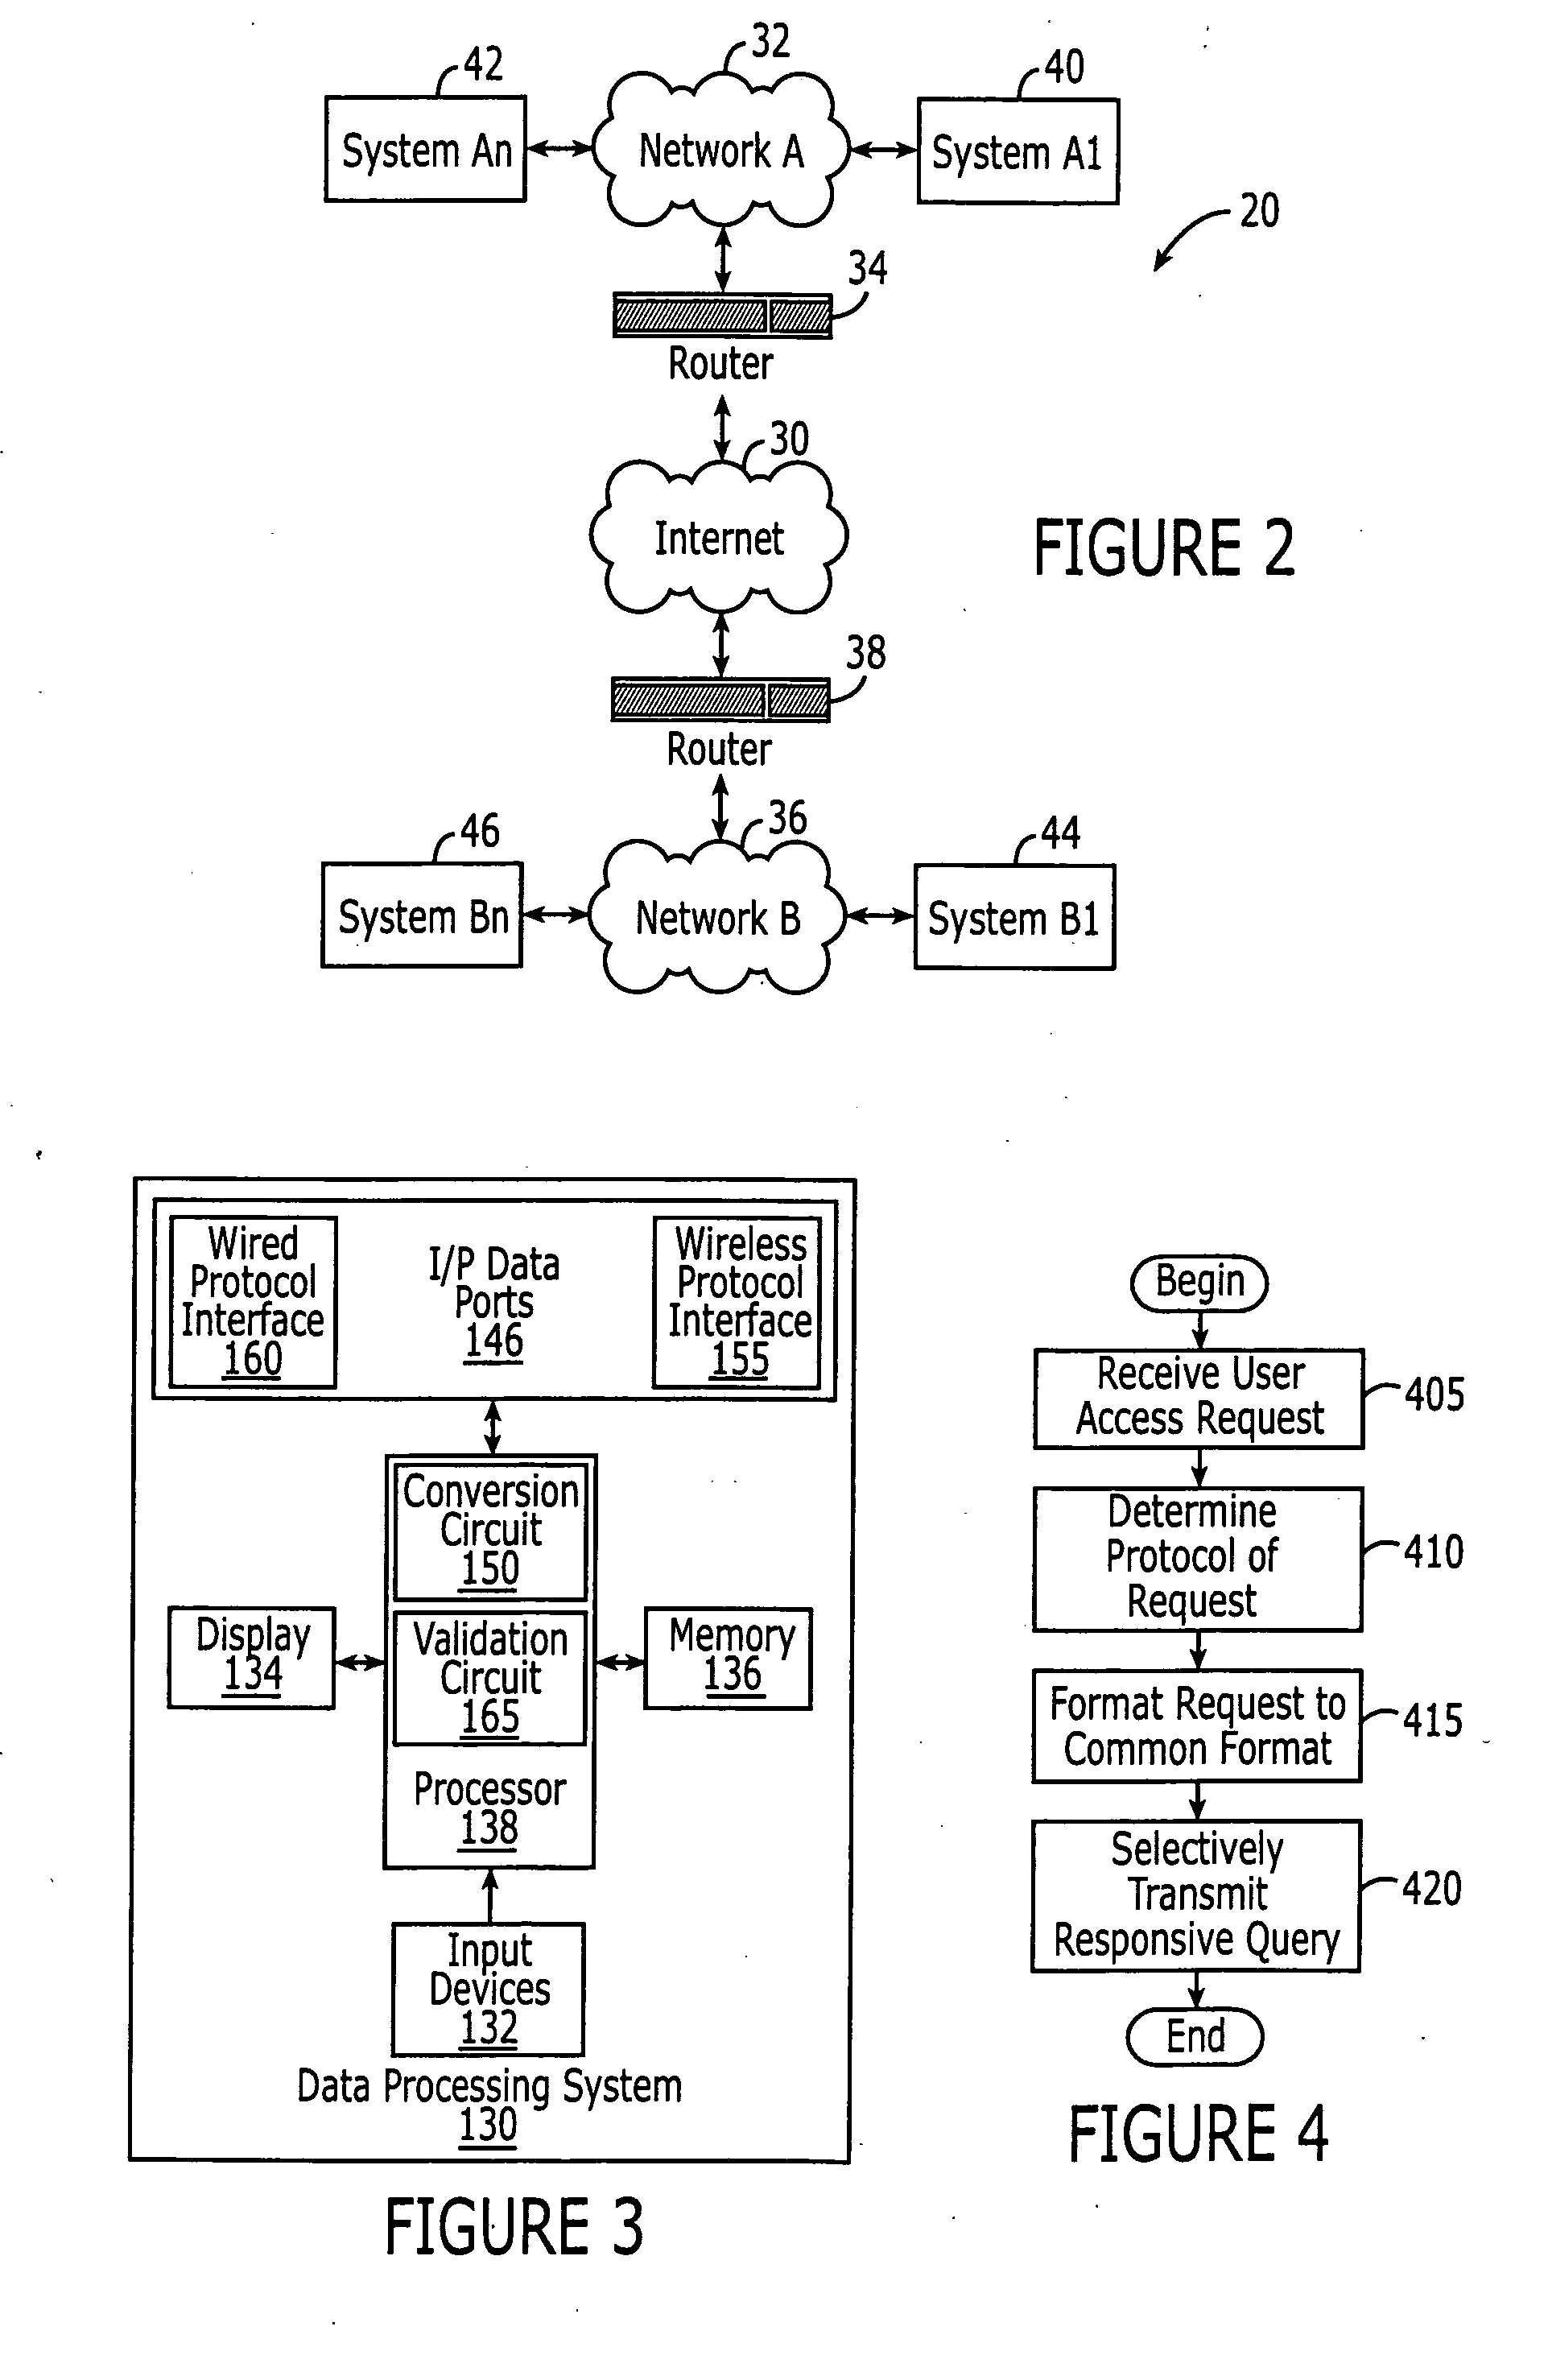 Methods, systems and computer program products for multi-protocol self-service application access